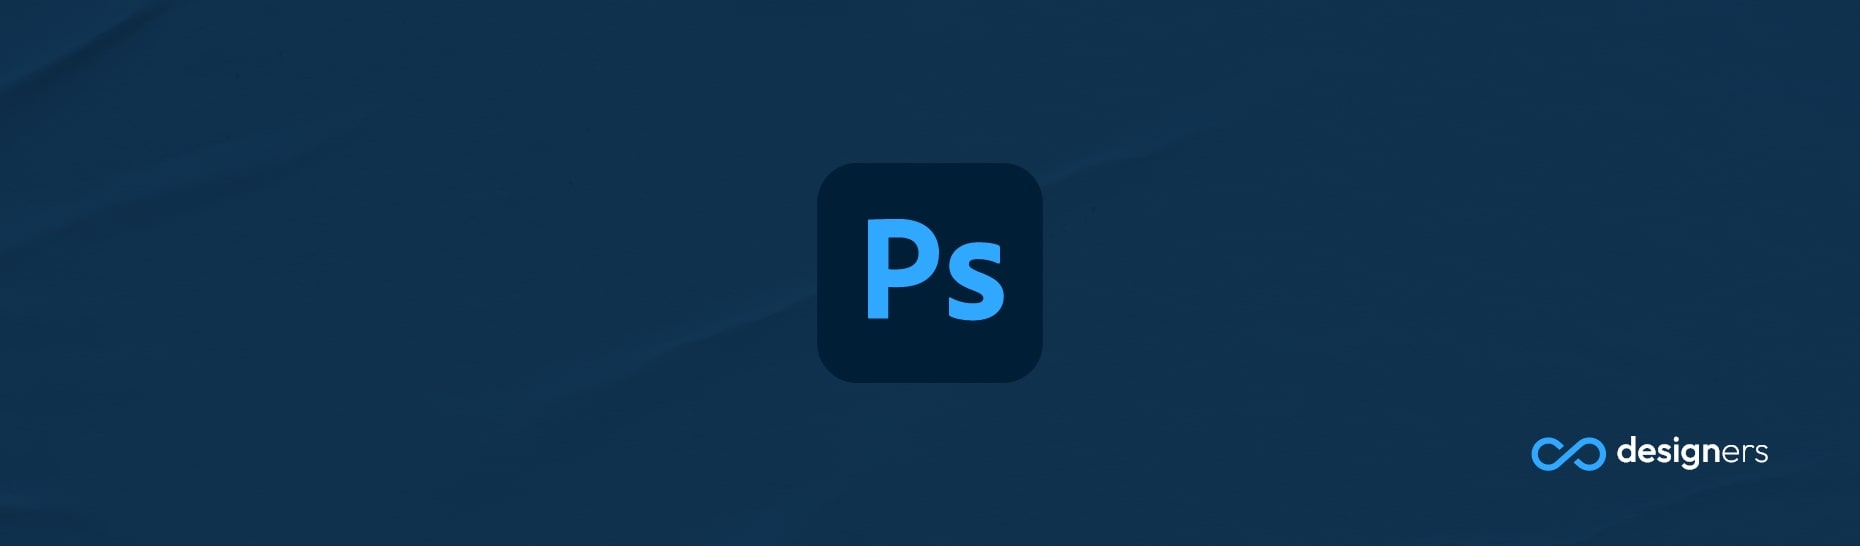 How can I download Photoshop for free on Mac?